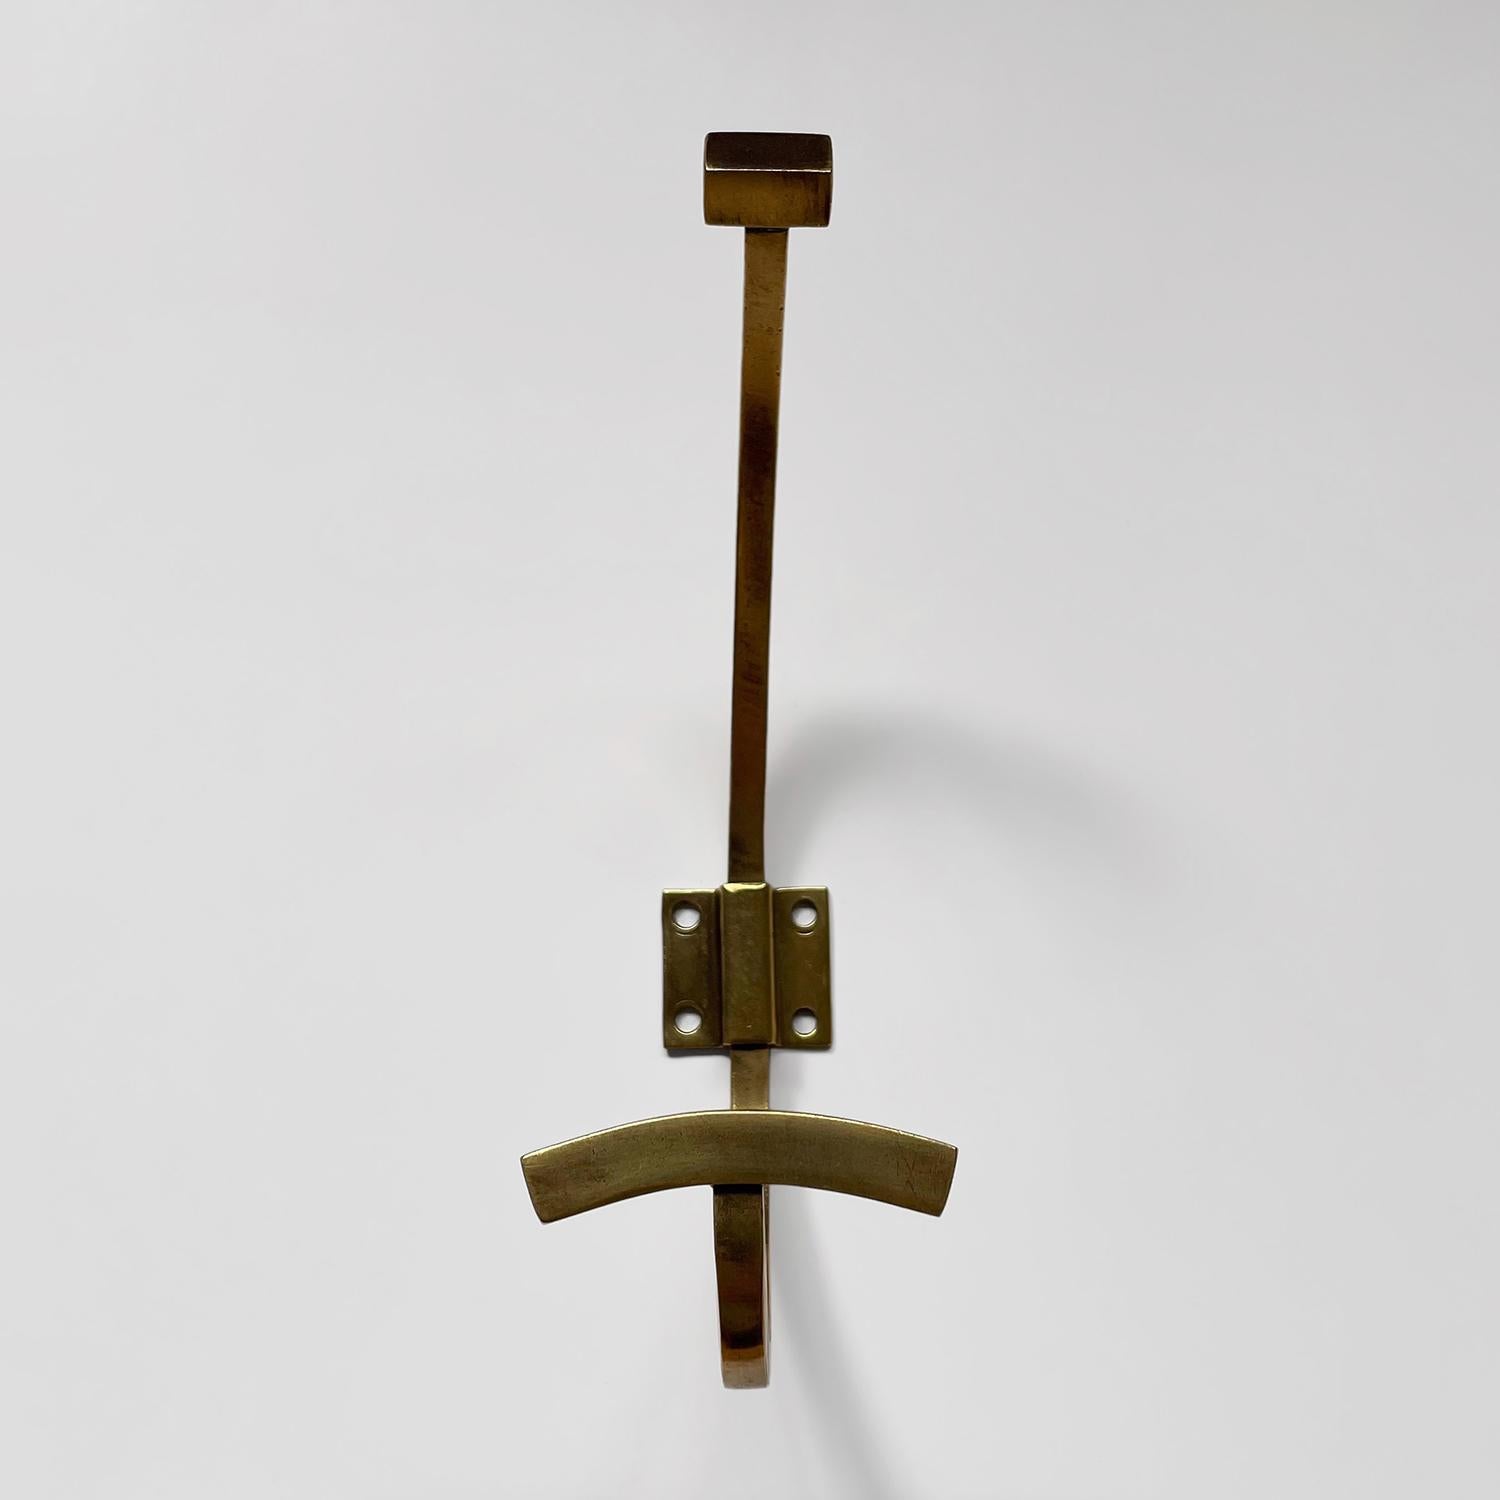 French brass double wall hook
France, mid century
Squared tubular framed brass creates a modern feel and design with clean lines
Curved brass J hook is framed off with an arched lower hook as well as a smaller upper hook
Wall mounted hook is